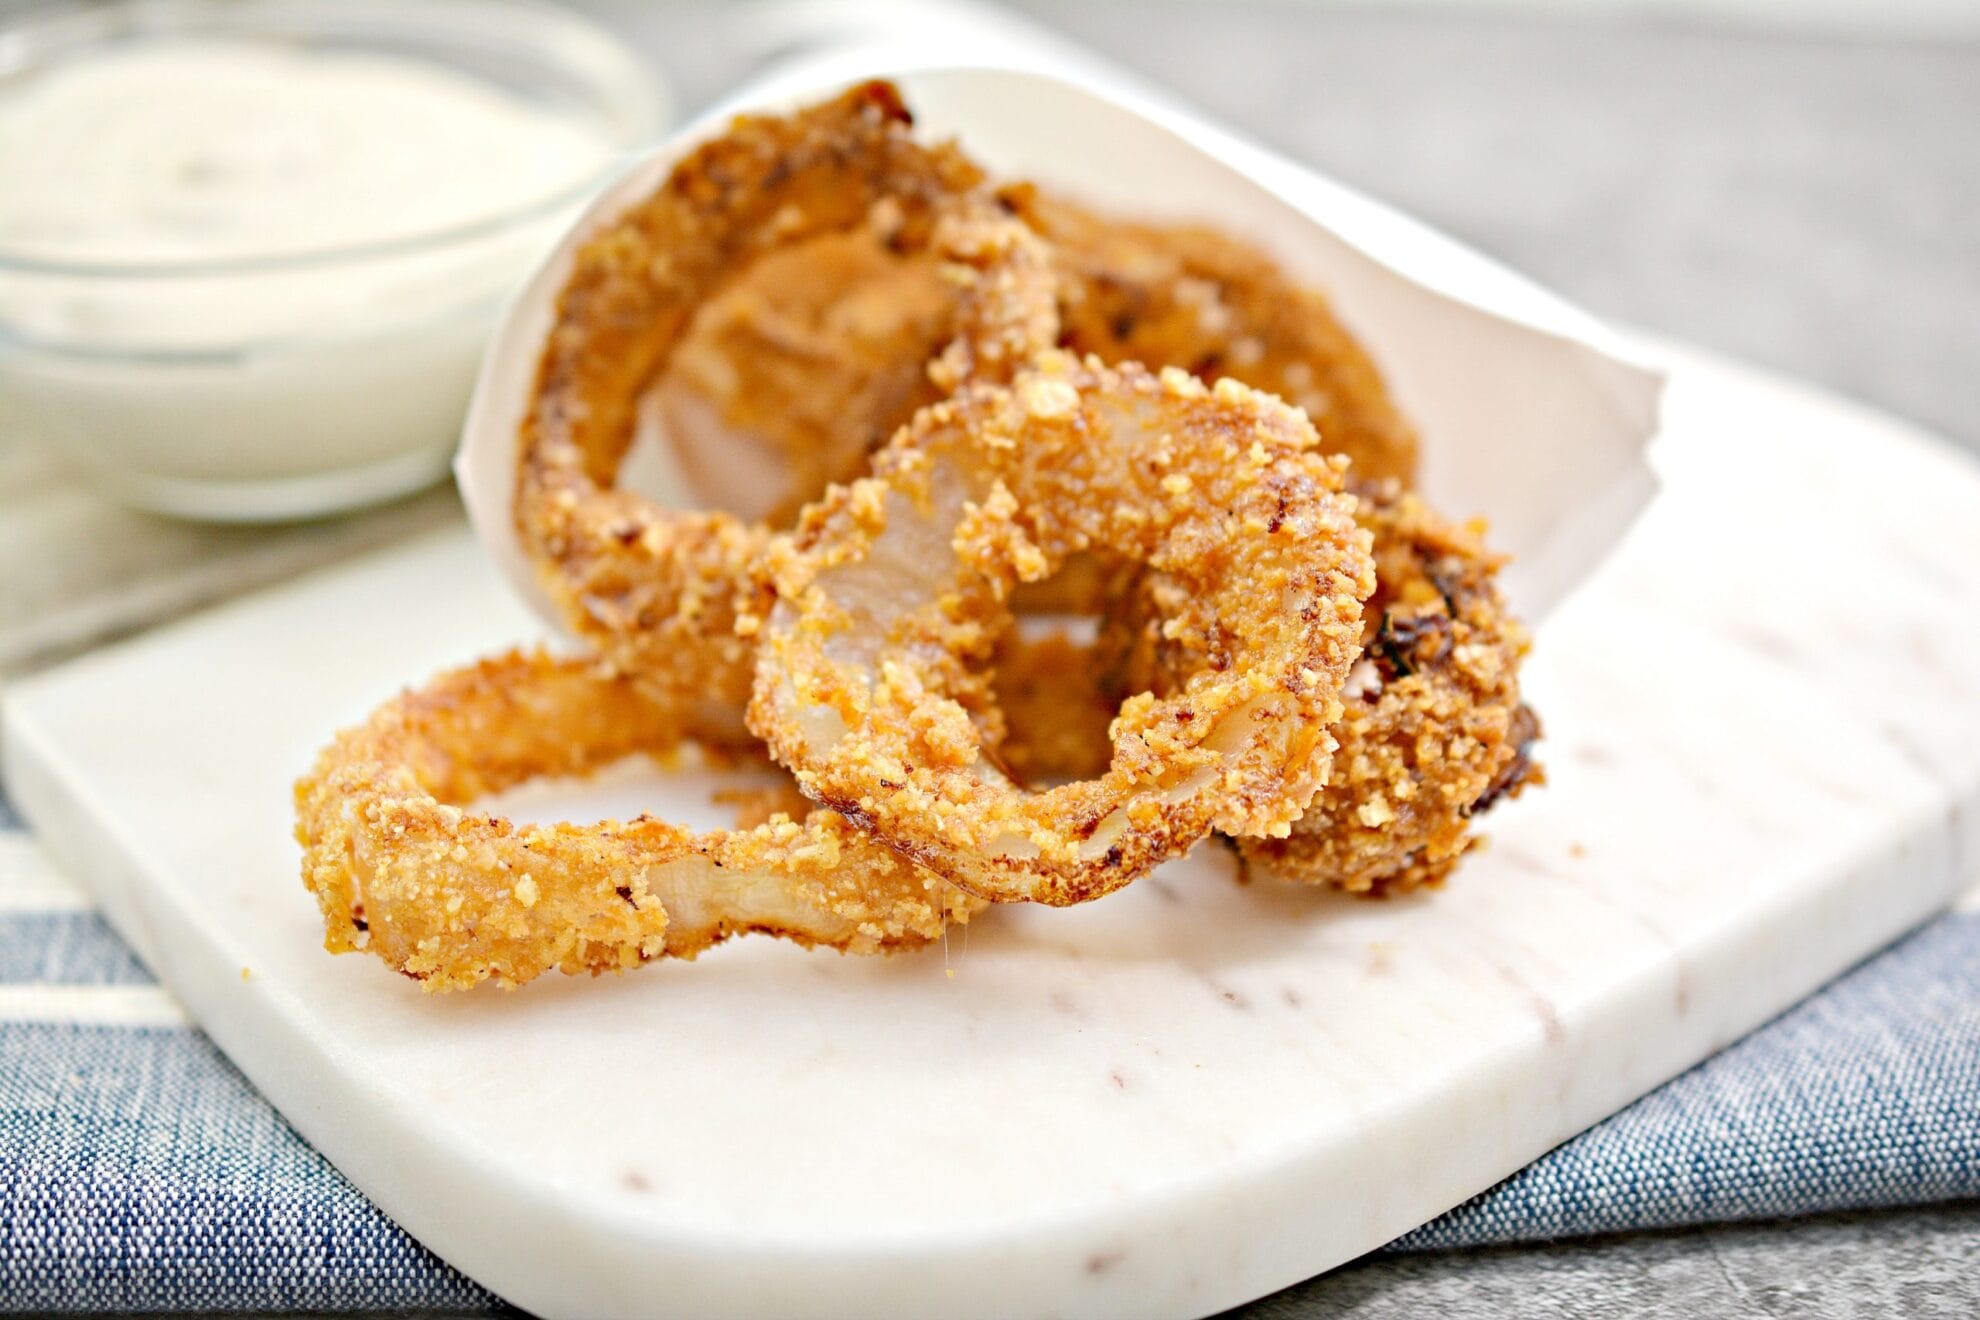 Following the Keto diet? Want a delicious snack or side dish that has the perfect crunch? Make these keto onion rings. They taste just like the real things and are perfect when you want onion rings or a crunchy snack.